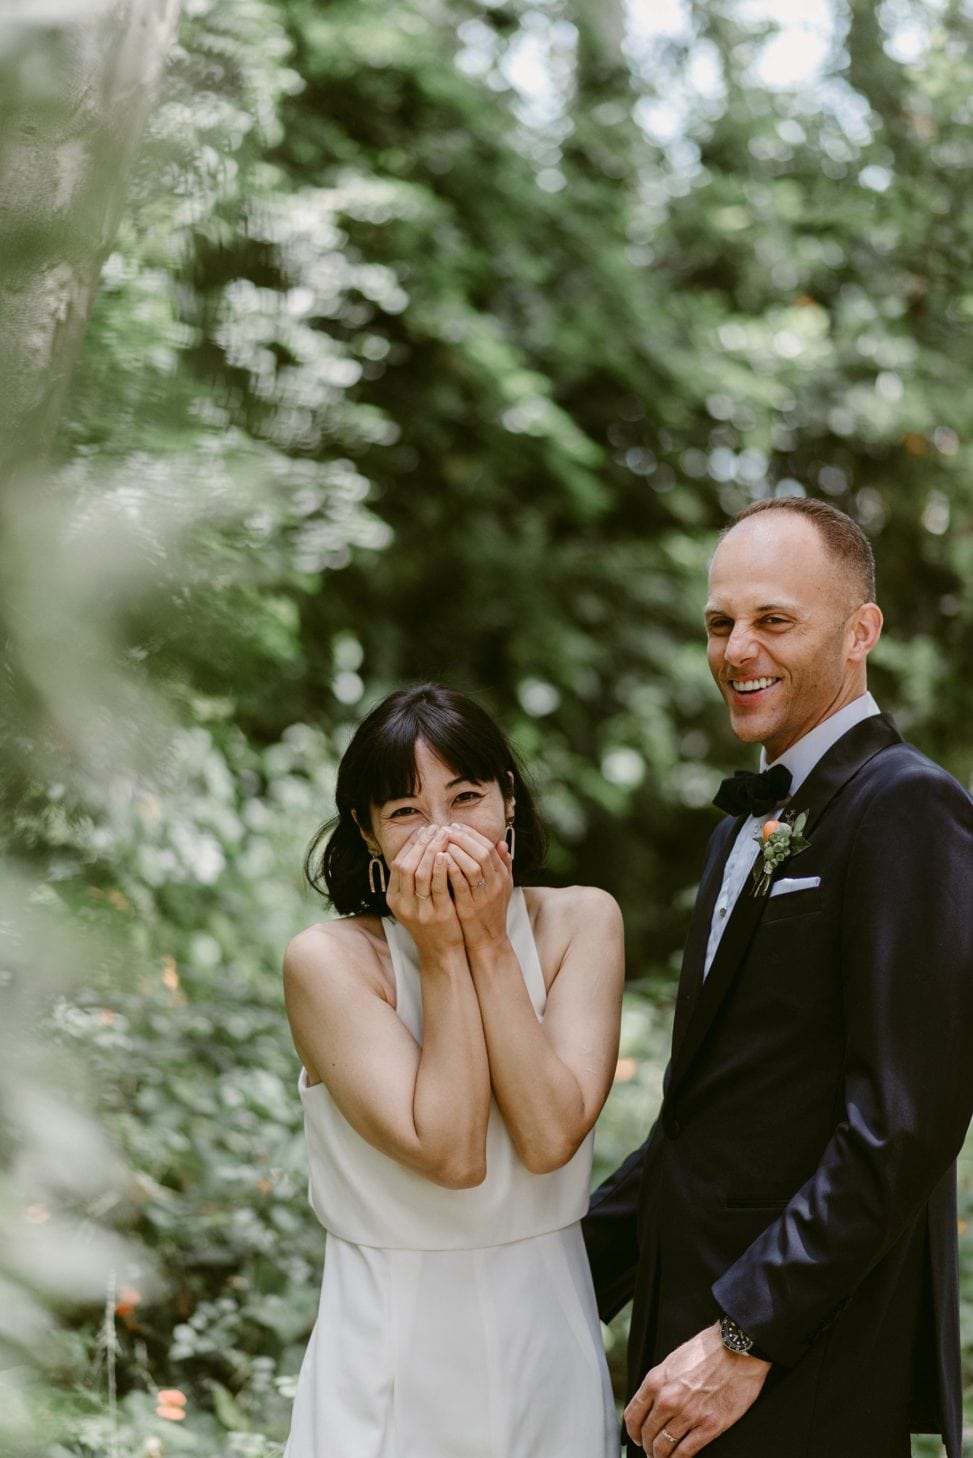 A Julie Pepin photo depicting a bride with shoulder length dark hair and bangs laughing into her hands, standing next to a groom in a black tux and bow tie, also laughing